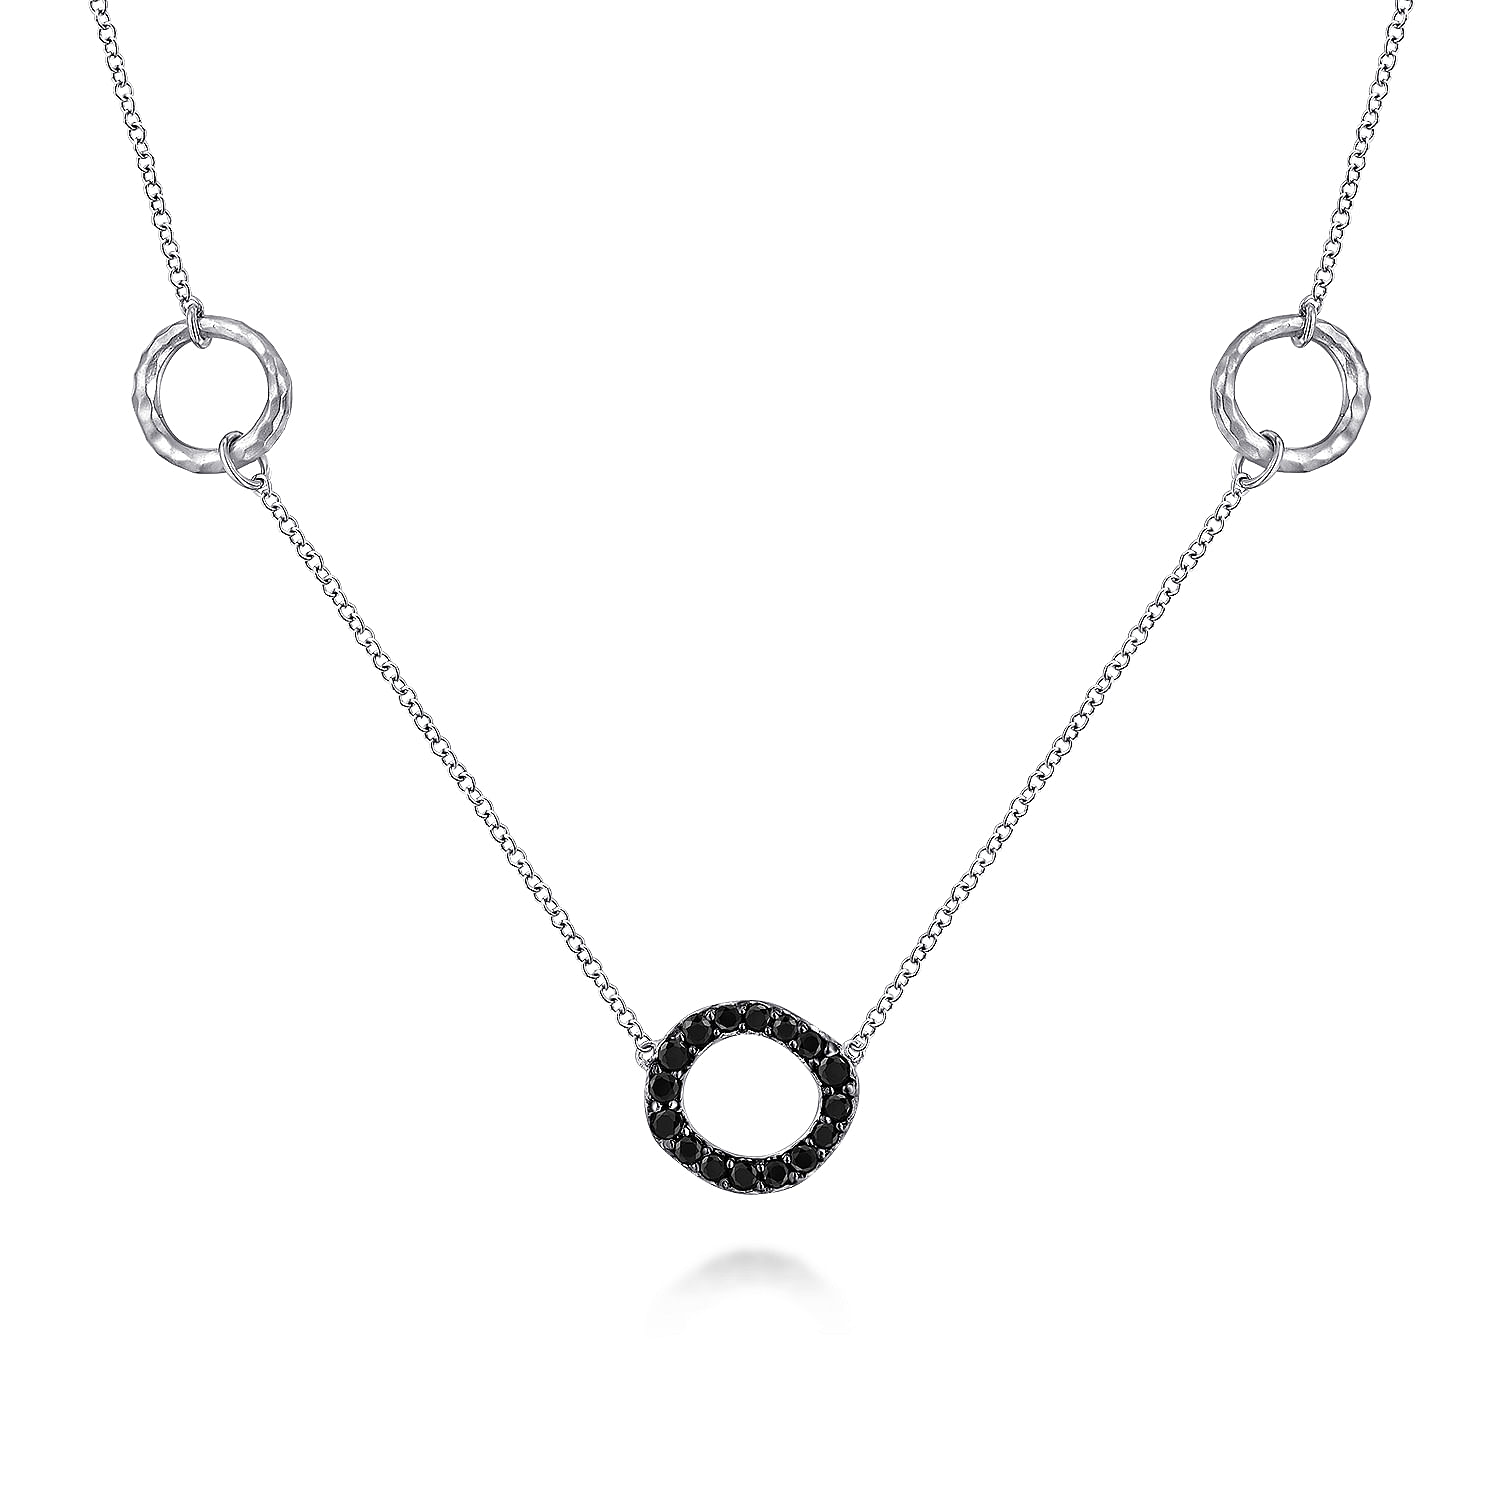 Hammered 925 Sterling Silver and Black Spinel Circle Station Necklace